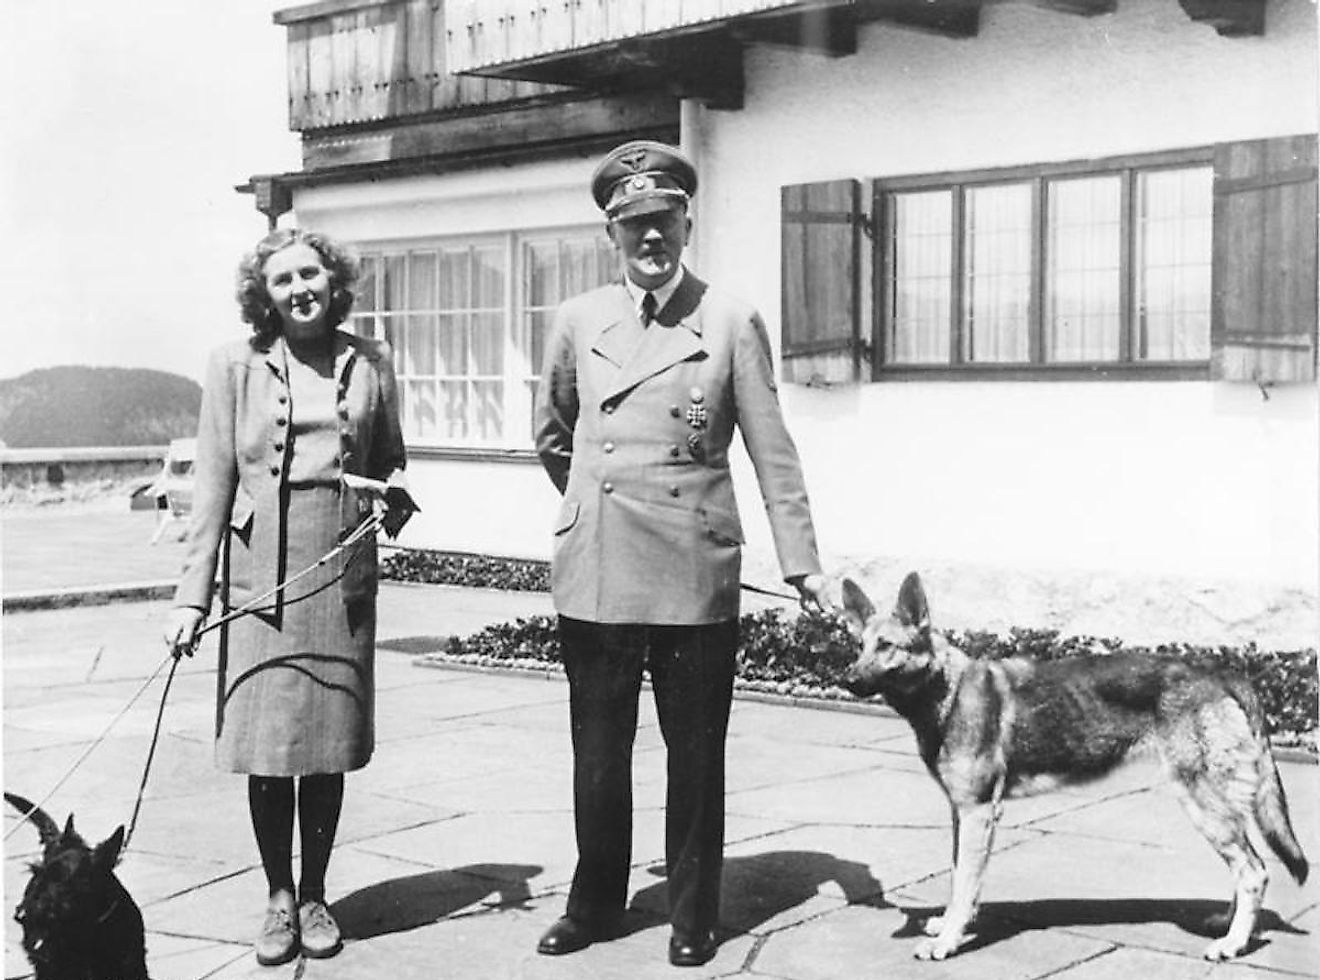 Despite repeated assassination attempts, Hitler survived till he took is own life. Eva Braun, his wife for 40 minutes and long-term companion, also committed suicide with him.